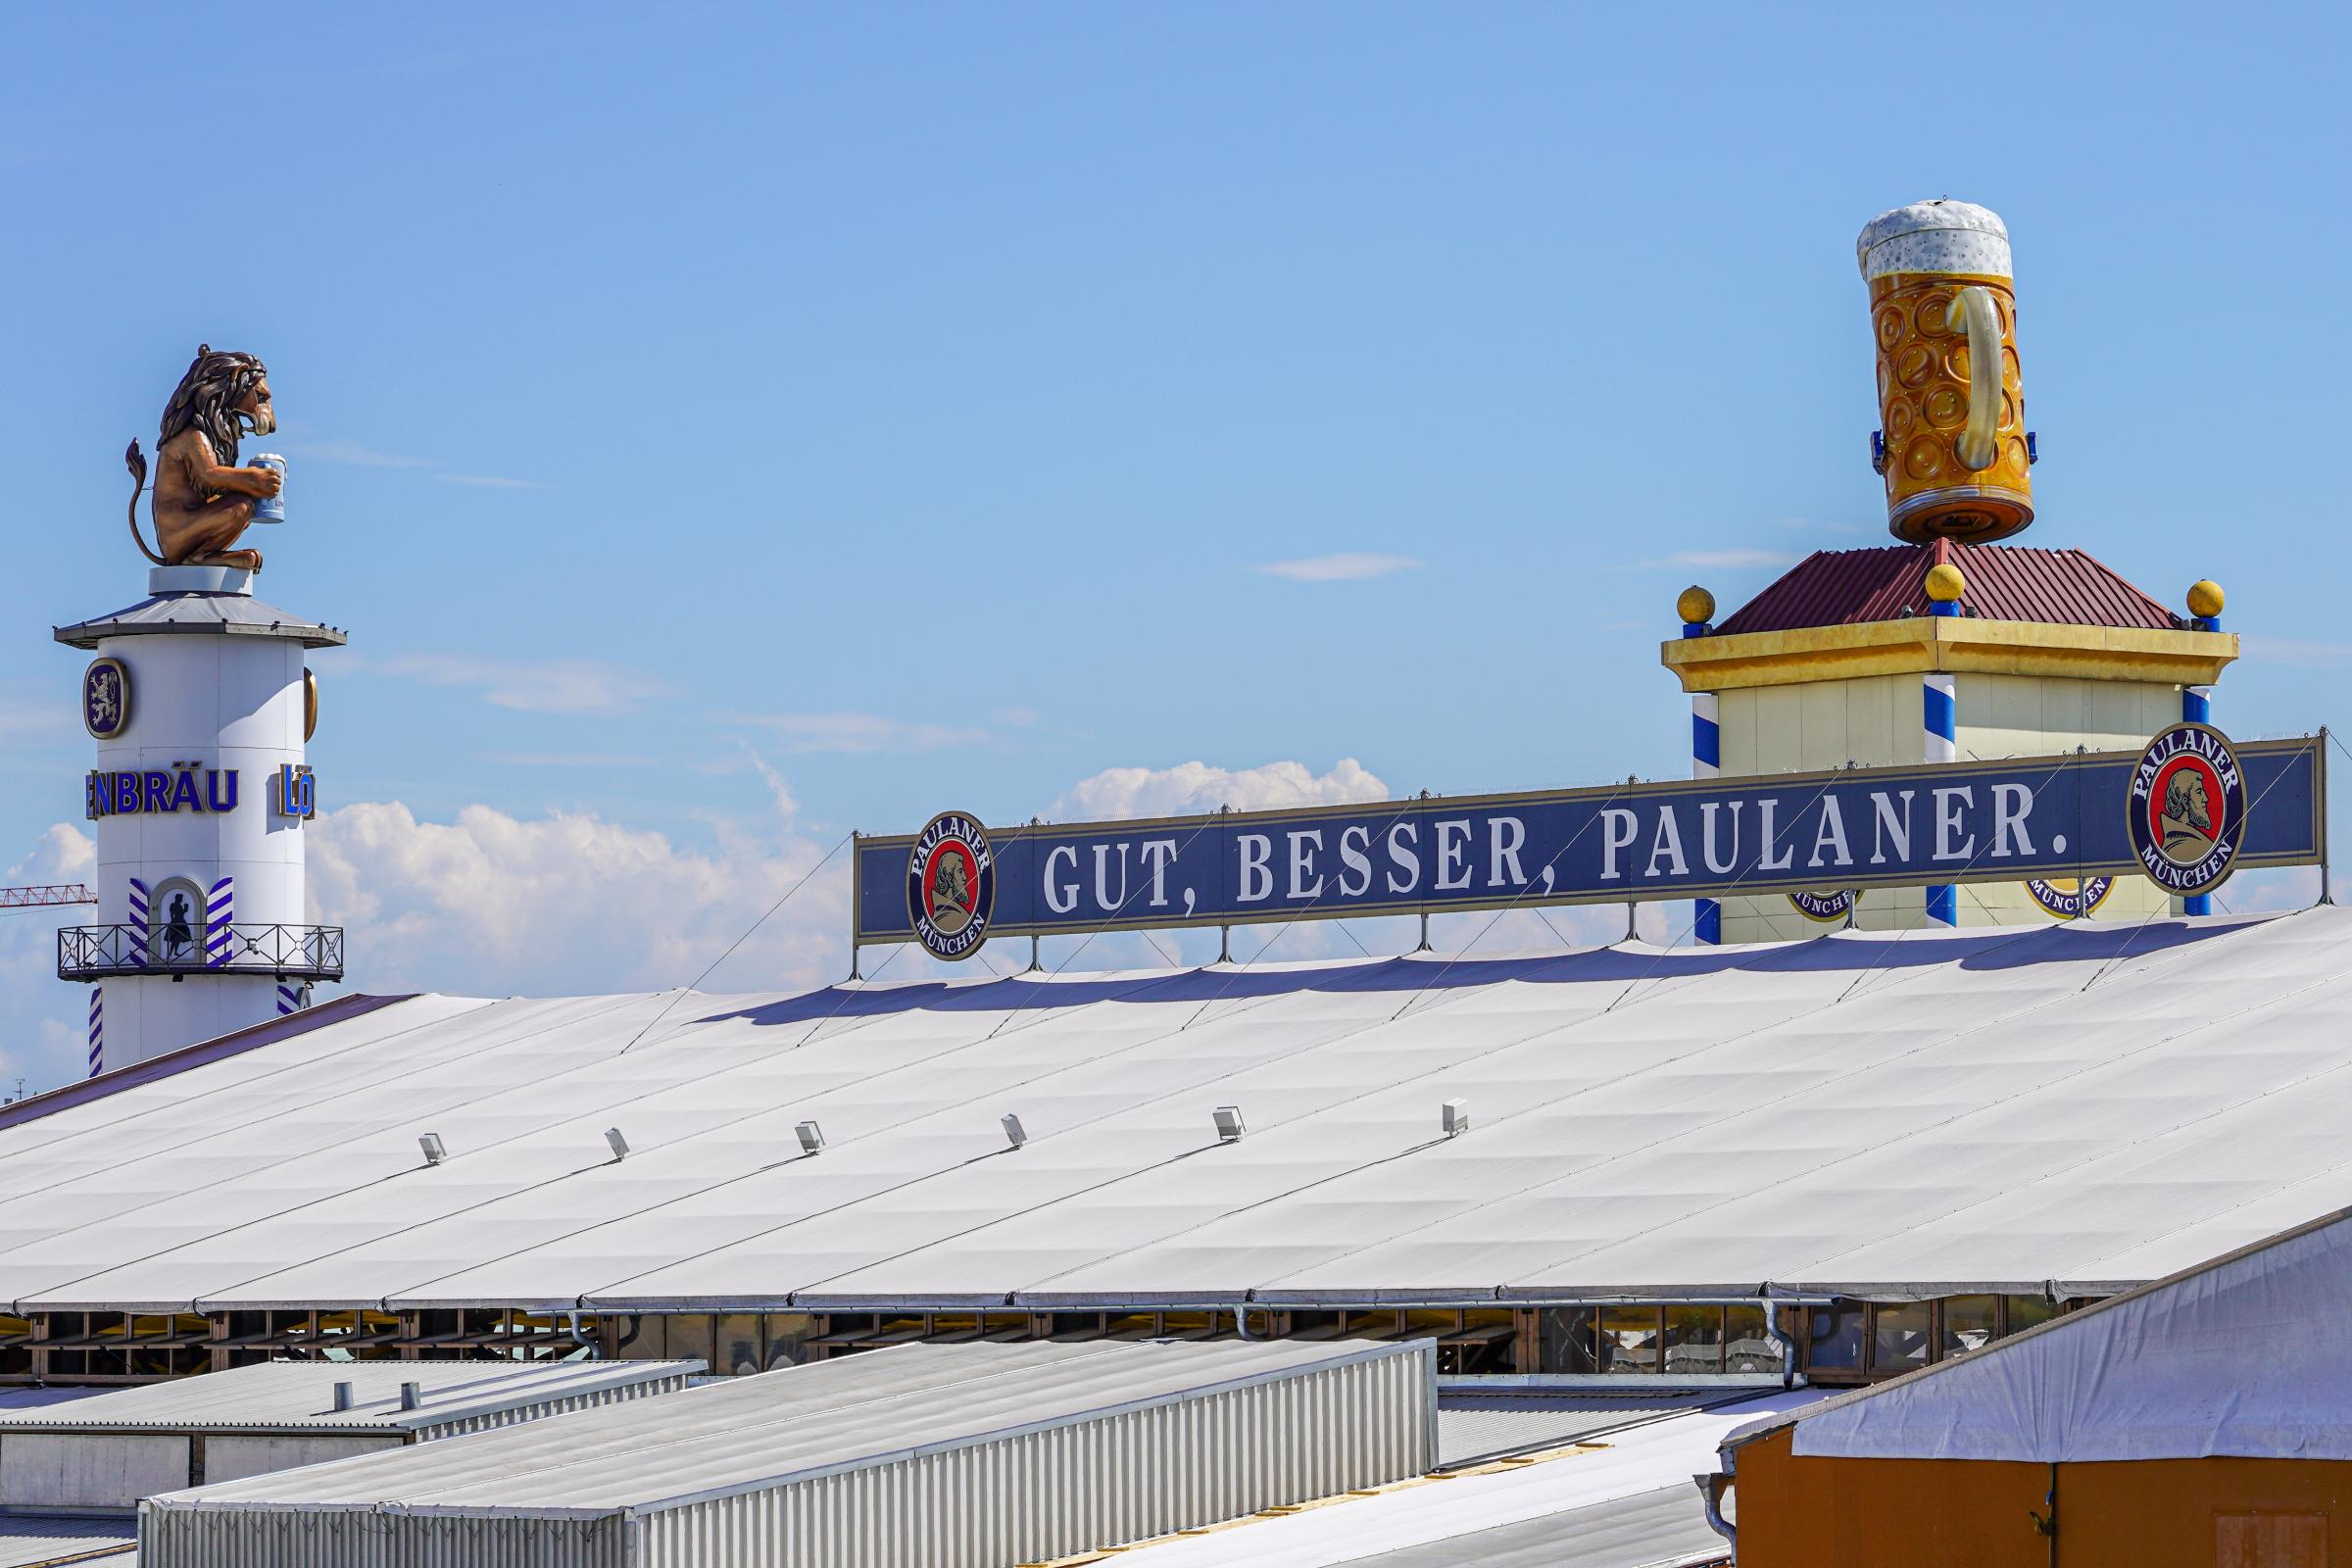 The Beer Tents for the world's largest Folk Festival, the Oktoberfest are set up